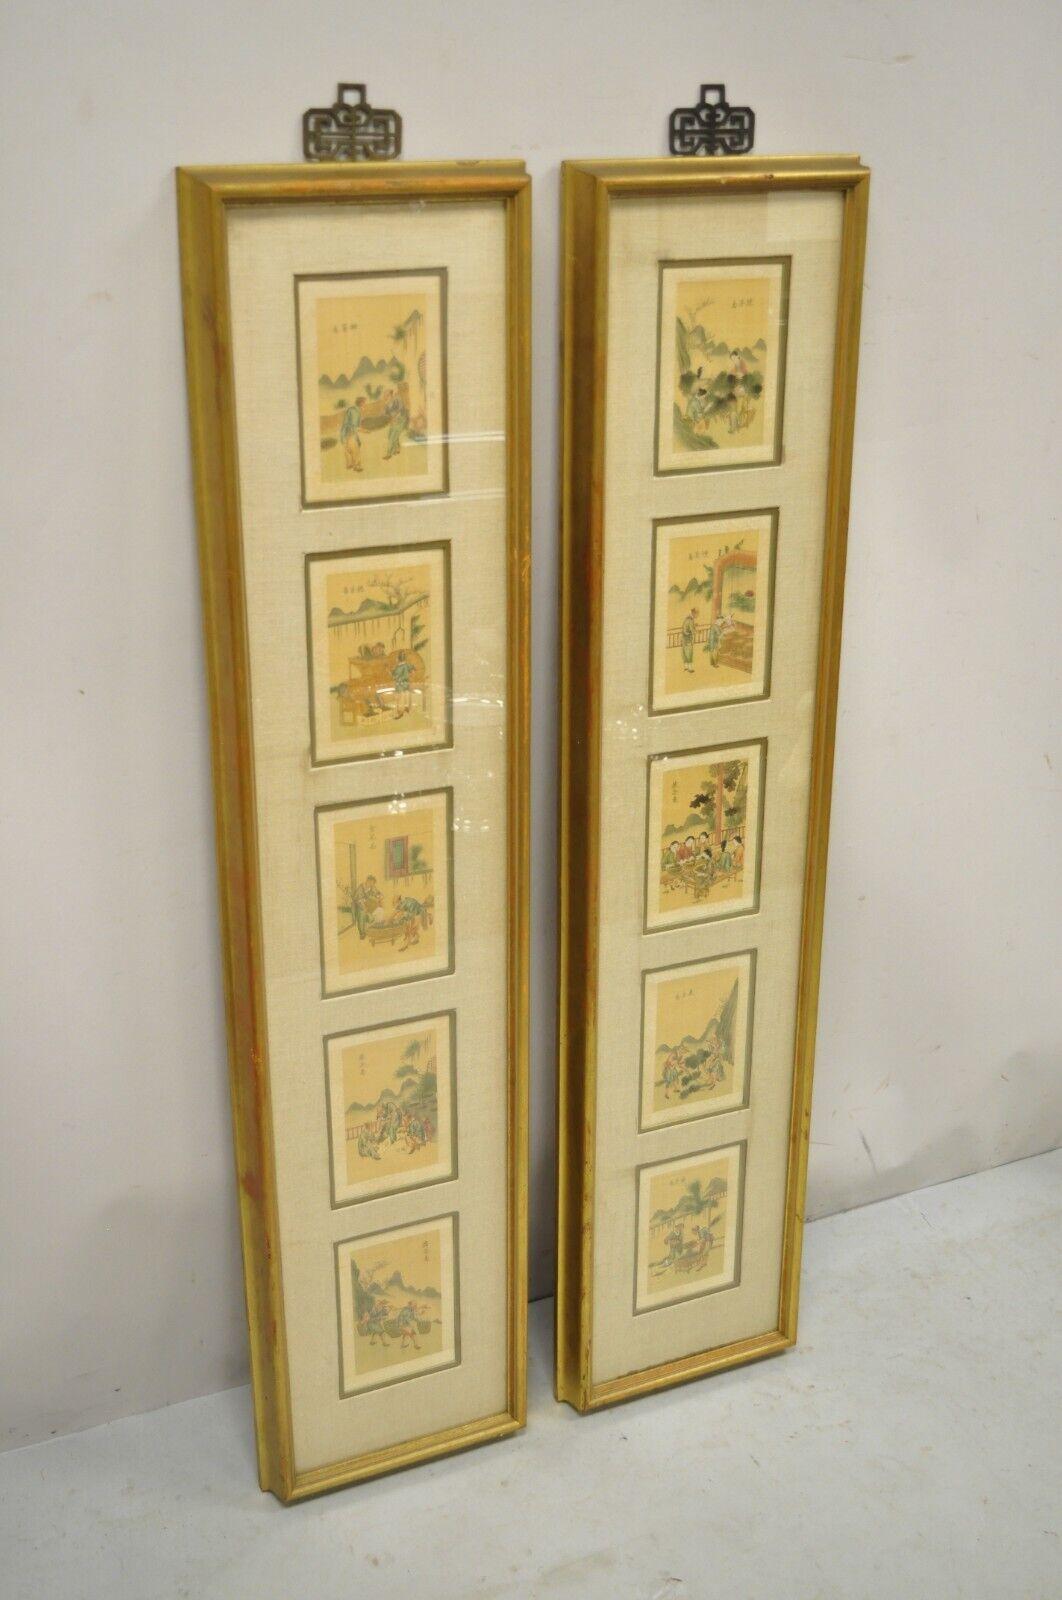 Vintage Asian Oriental framed prints with narrow gold frames - a pair. Item features a wood frame with distressed finish, brass decorative hooks, (5) framed prints per piece of various village scenes. Circa Mid 20th Century. Measurements: 46.75